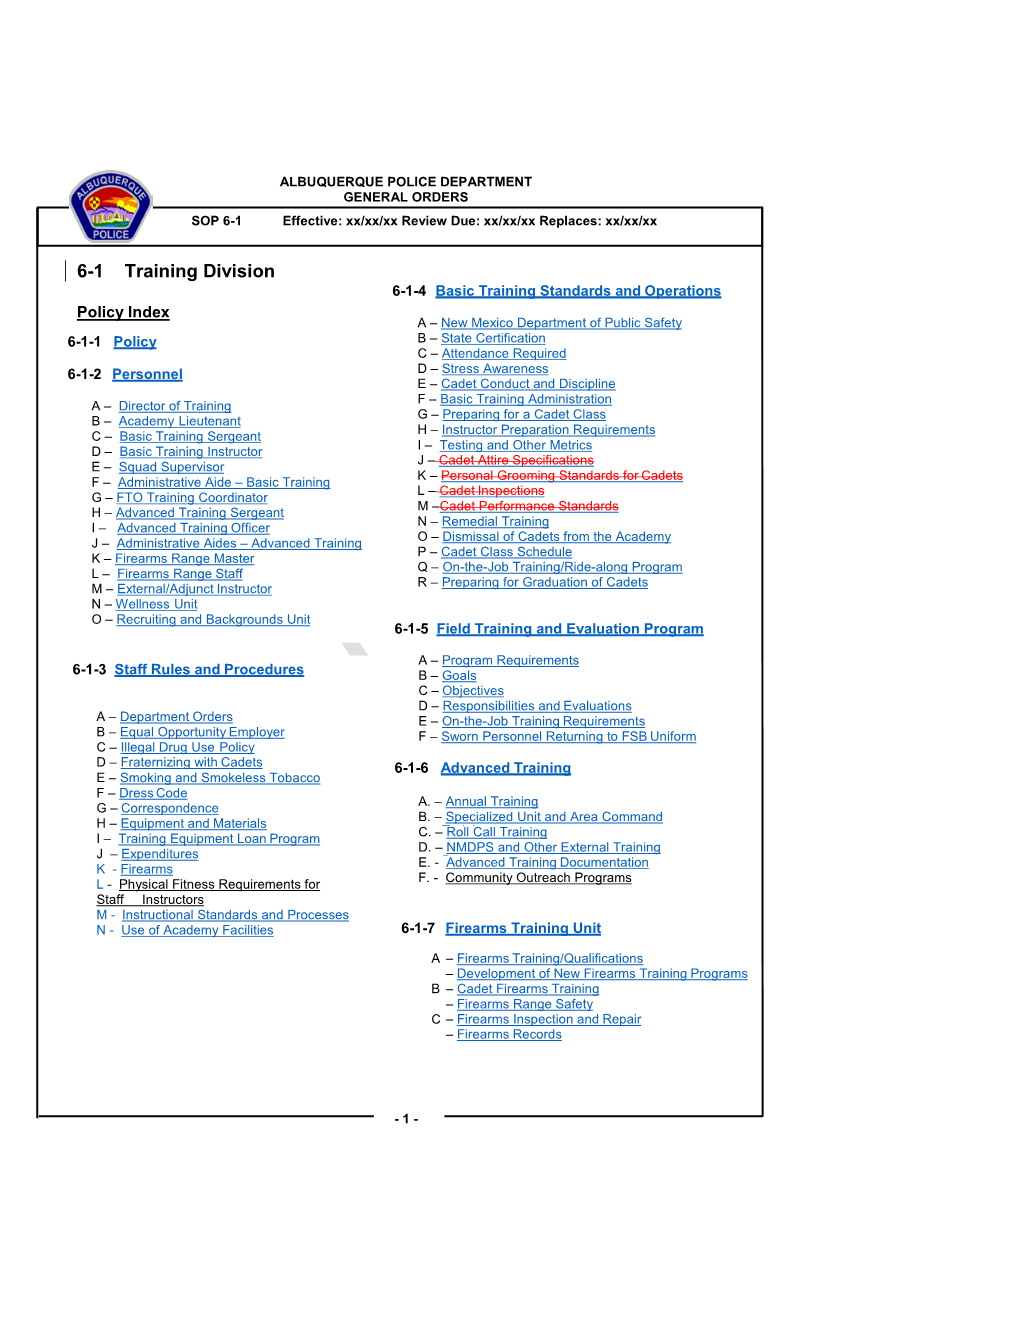 6-1 Training Division 6-1-4 Basic Training Standards and Operations Policy Index a – New Mexico Department of Public Safety